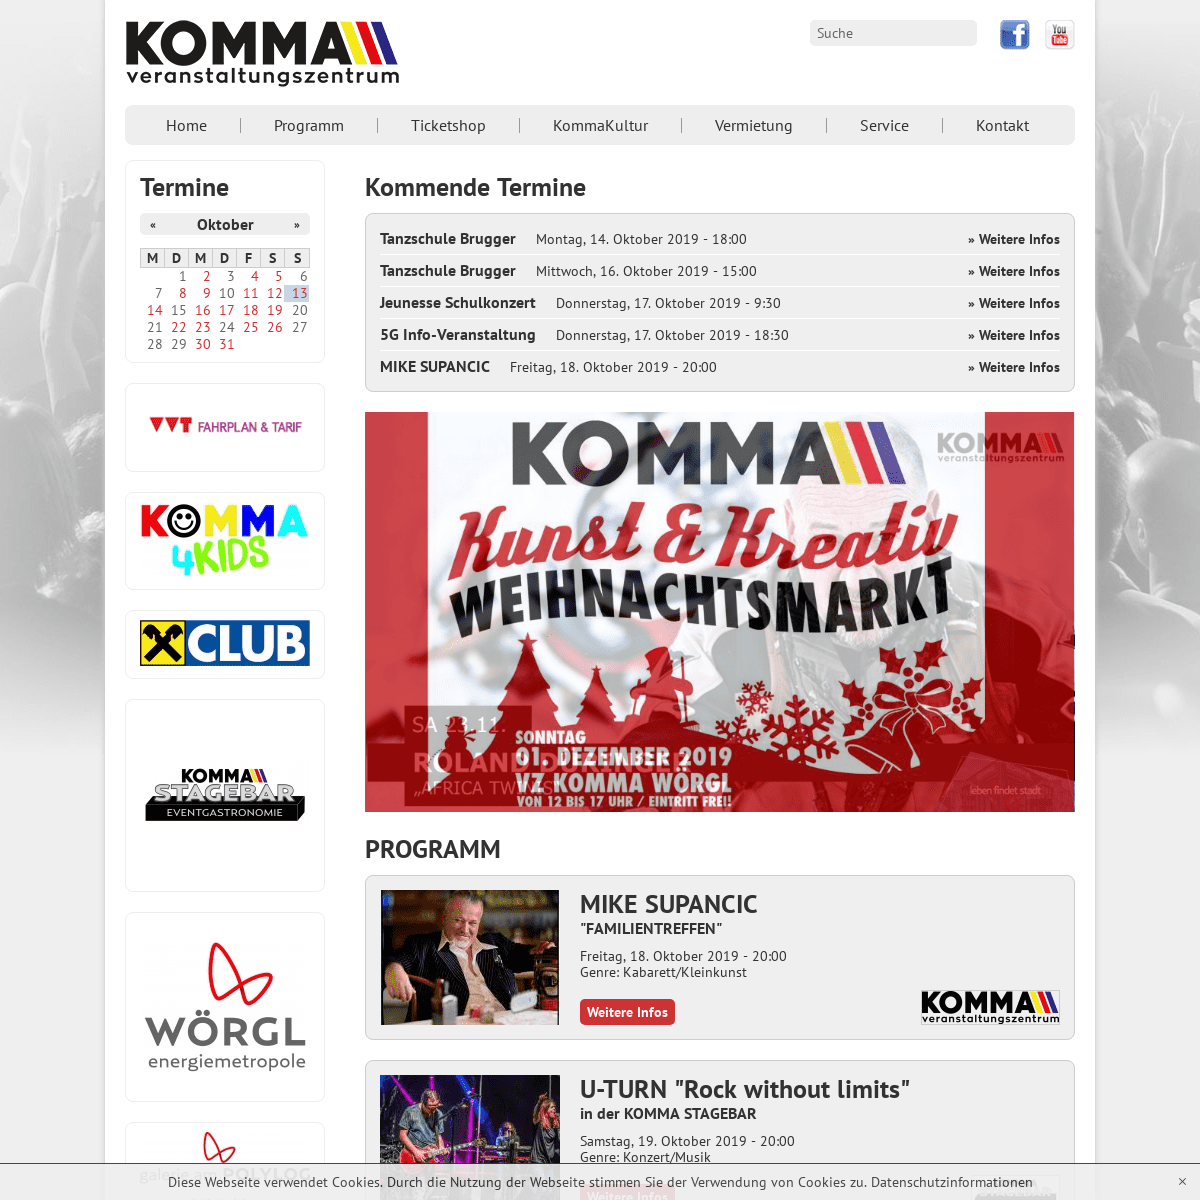 A complete backup of komma.at